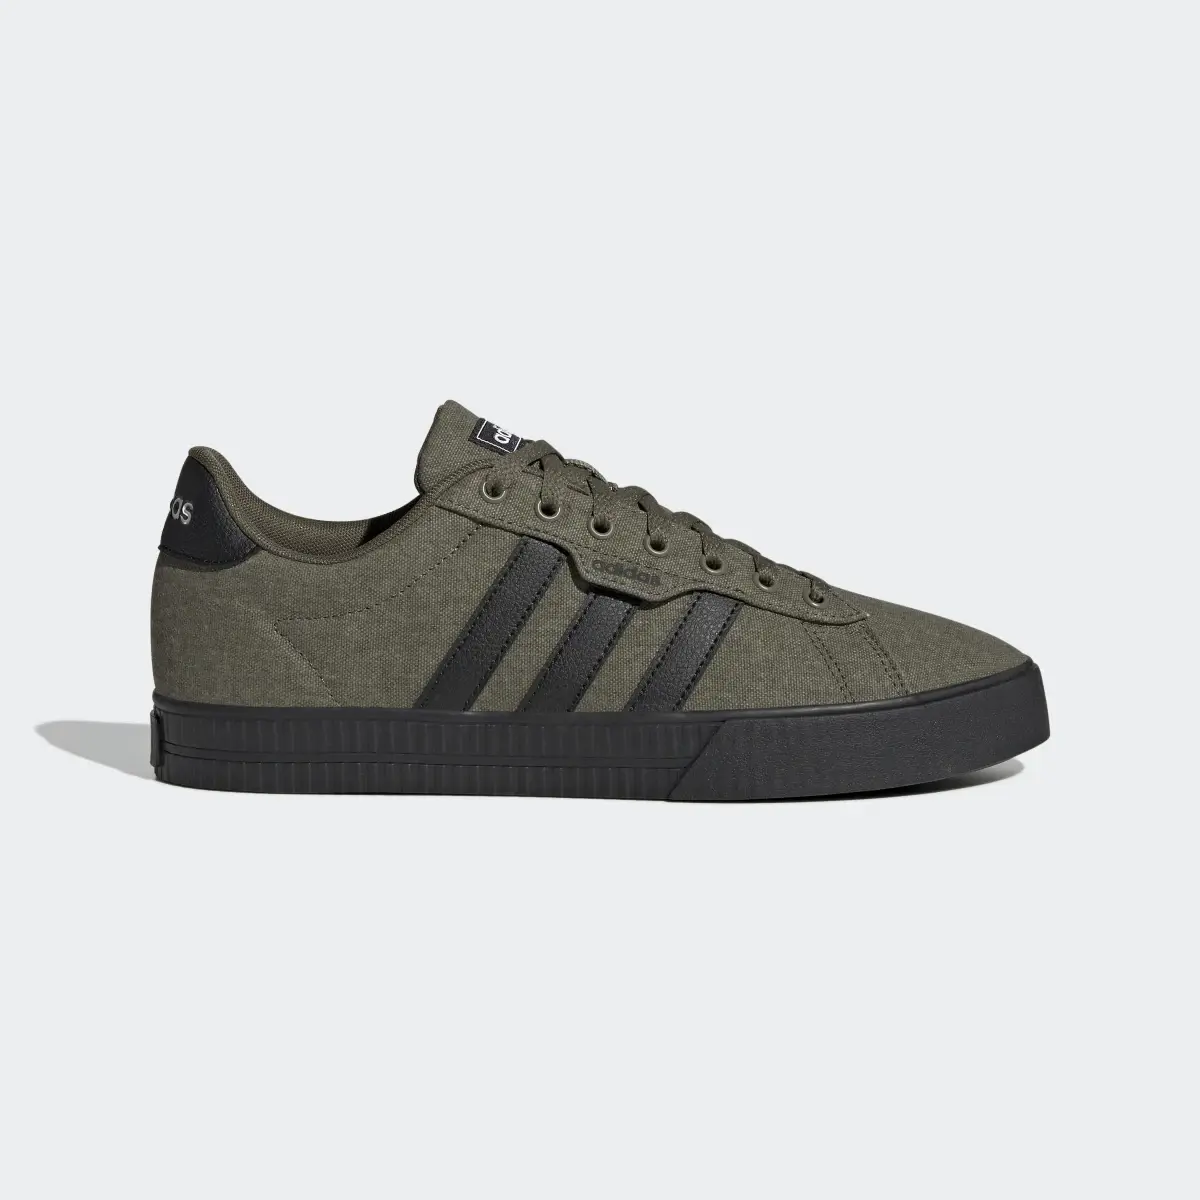 Adidas Daily 3.0 Shoes. 2